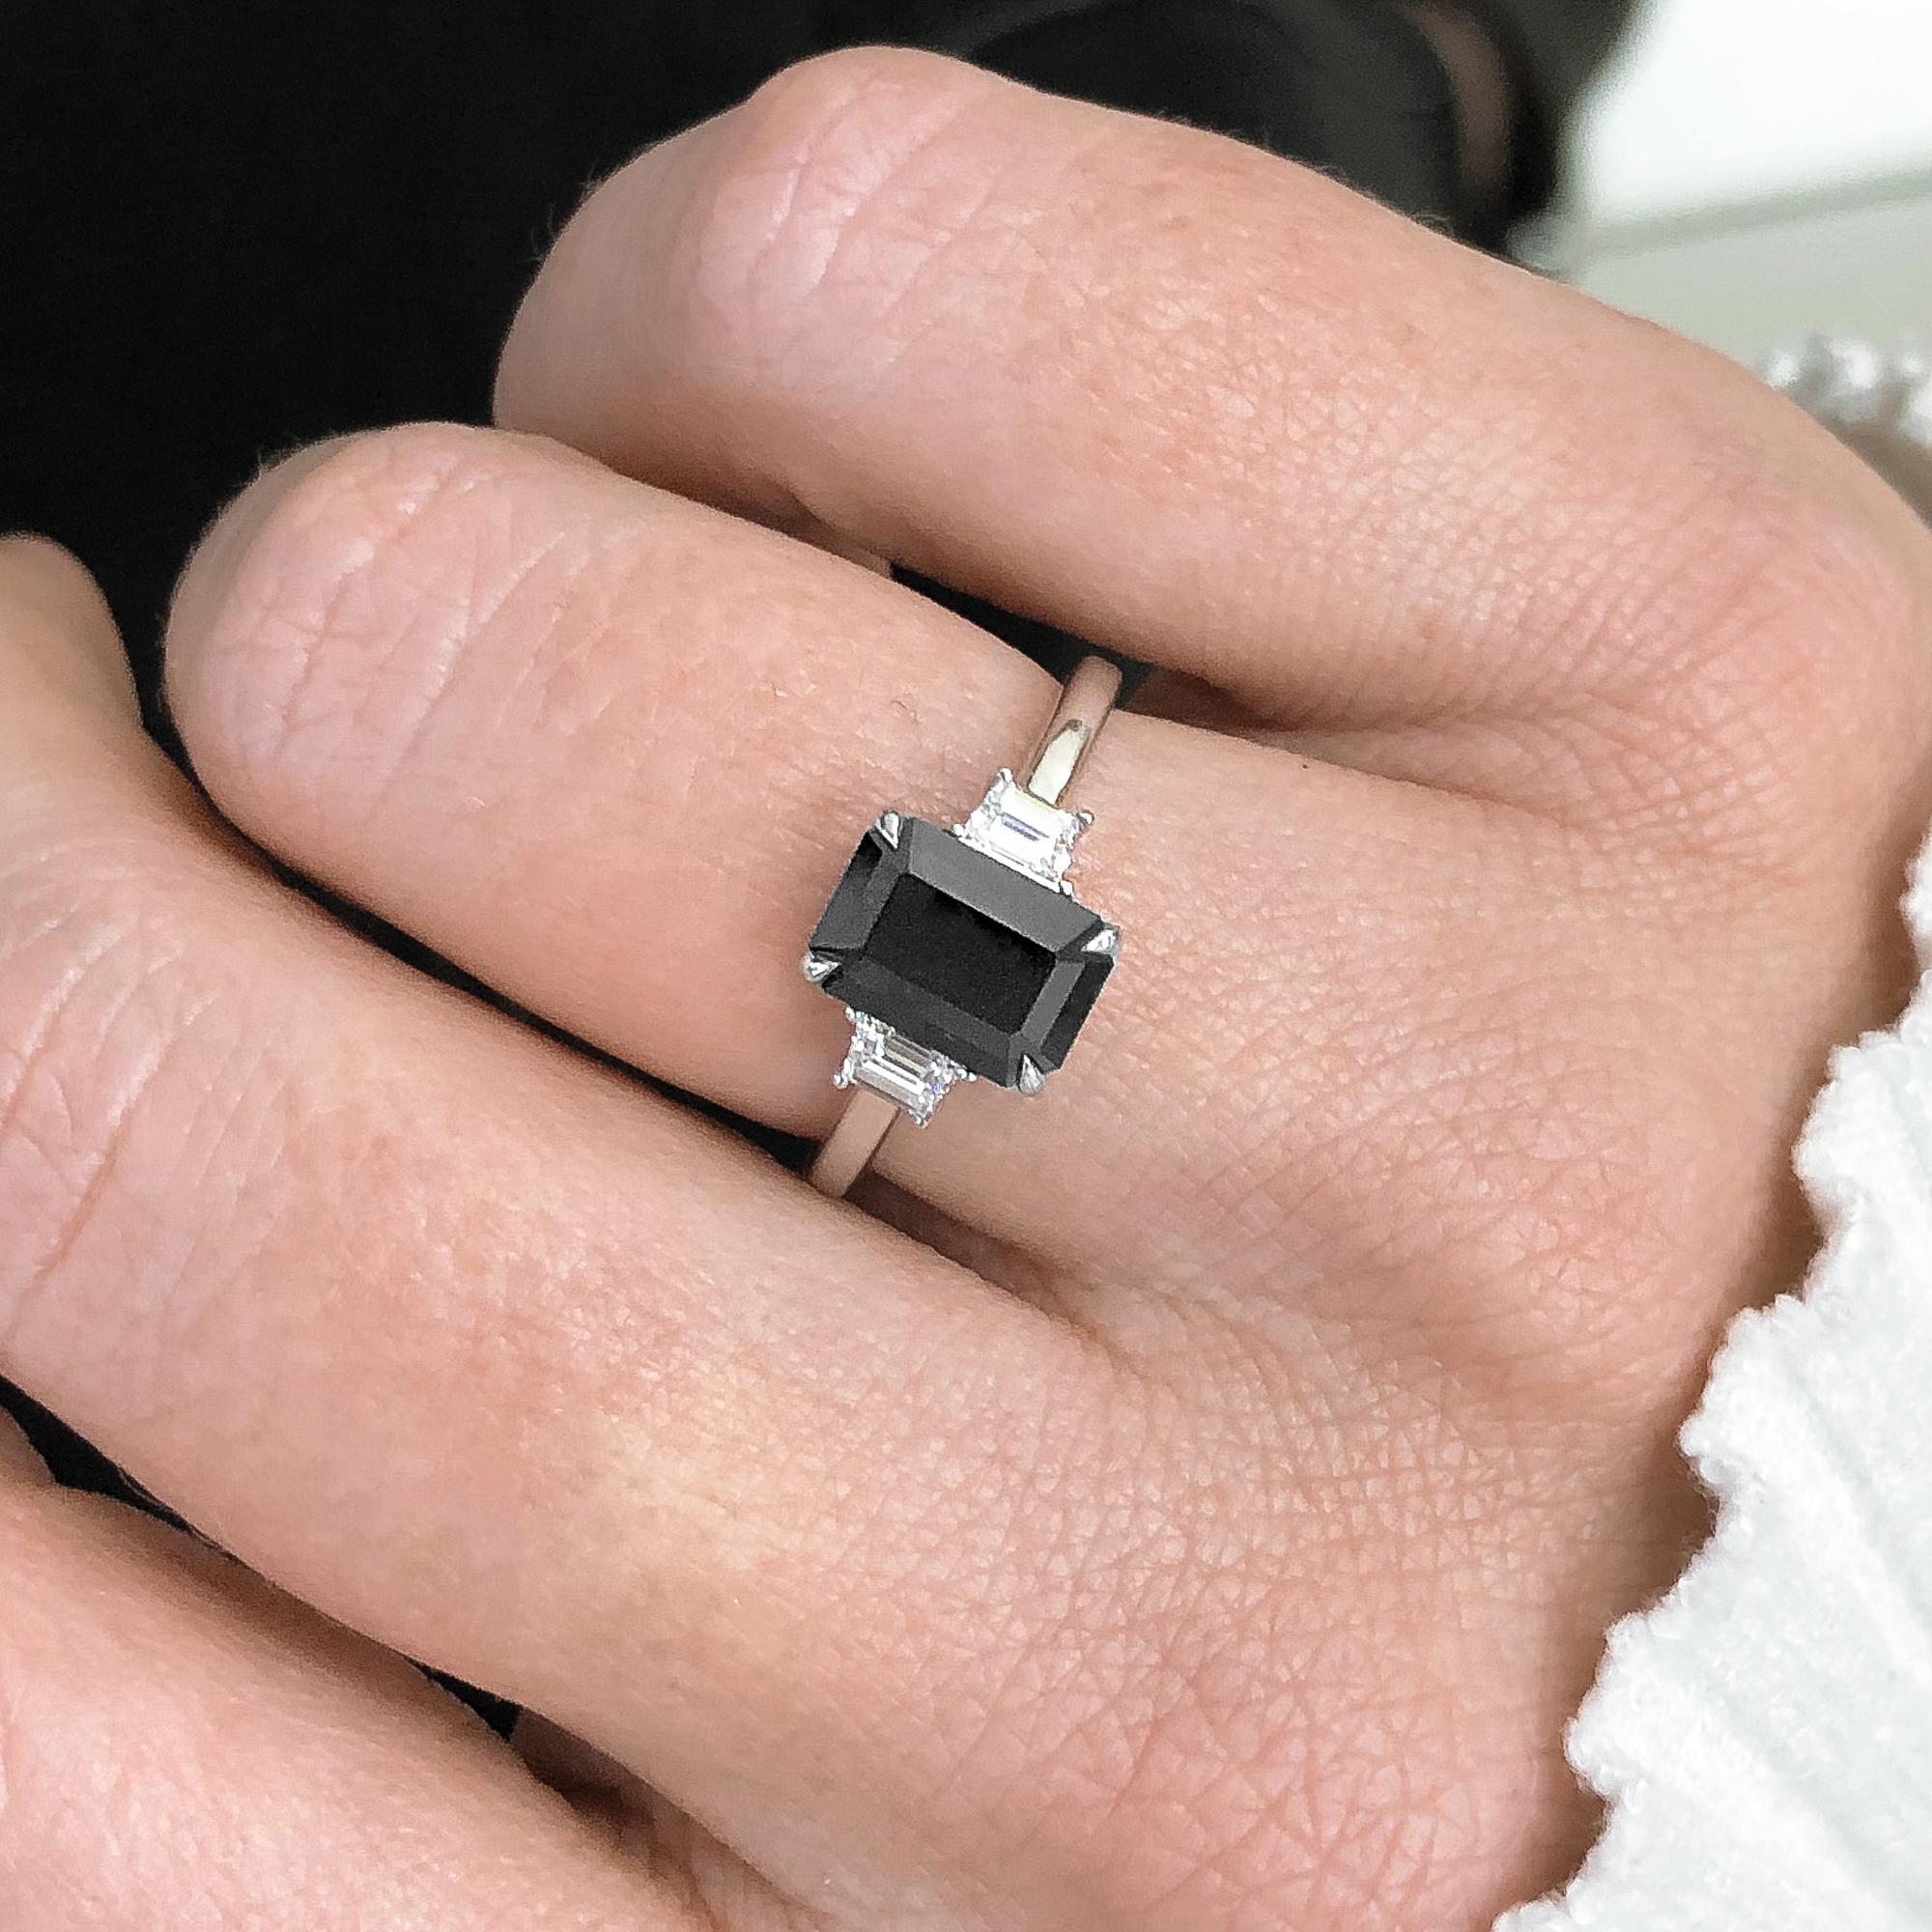 Amazing black genuine diamond ring, with beautiful 2 carat Emerald-cut black diamond!
The Side white diamonds create contrast for the black and look just gorgeous.
An alternative engagement ring, or just an amazing gift for your loved one